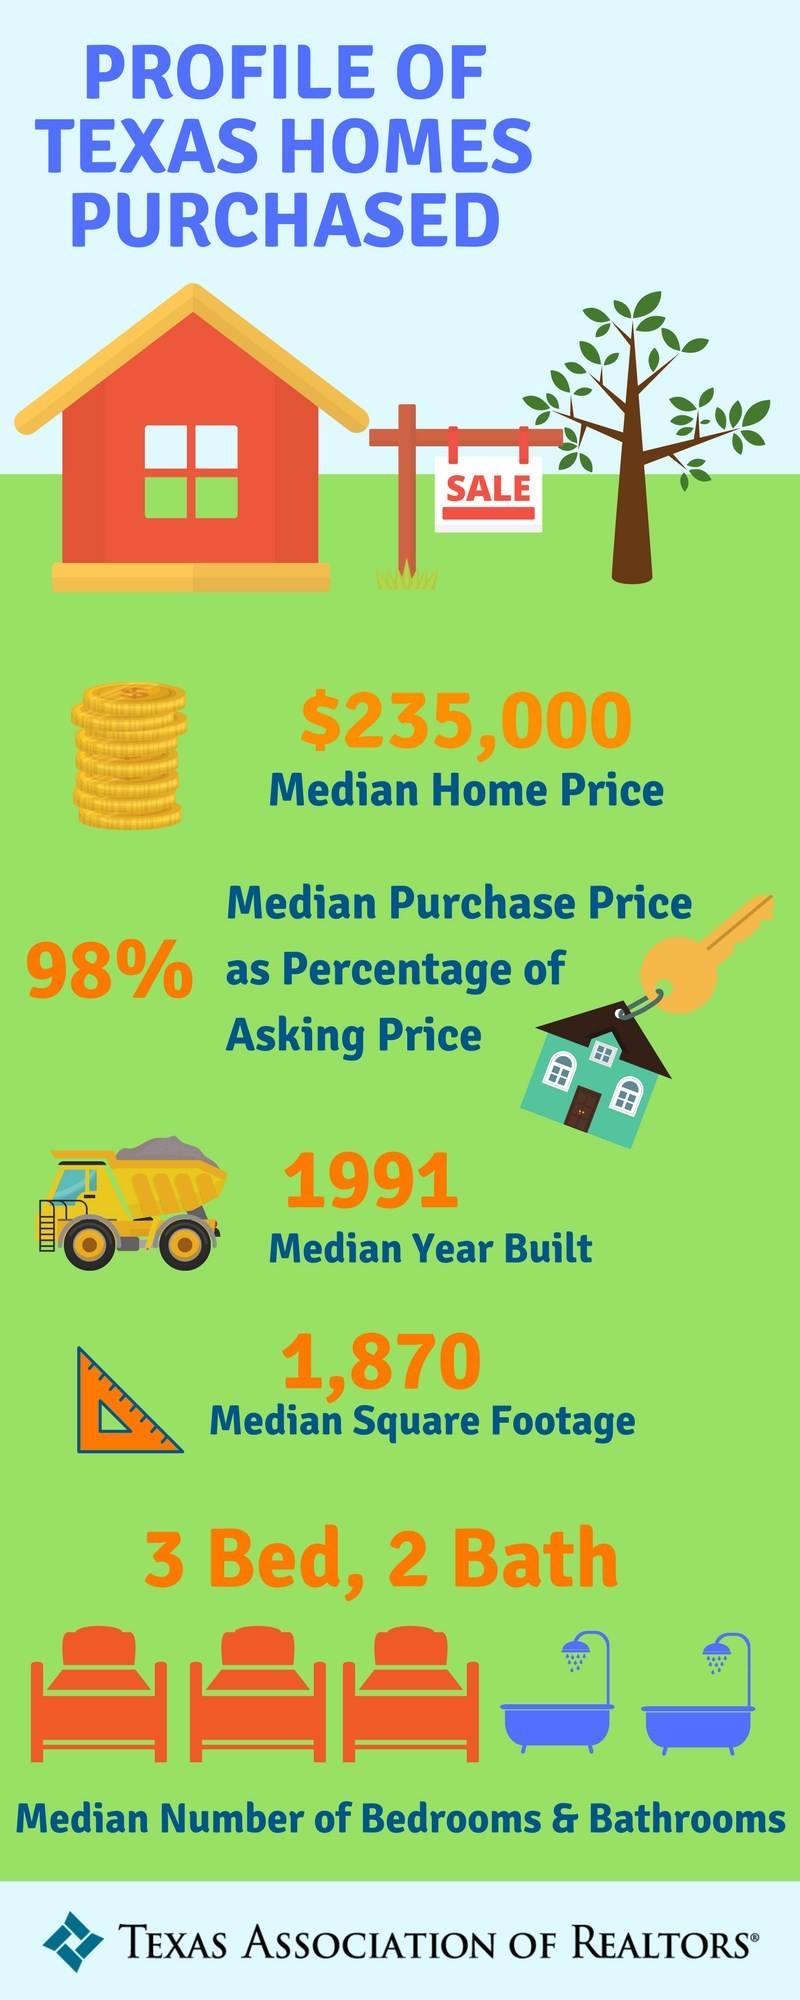 Profile of Texas Homes Purchased infographic